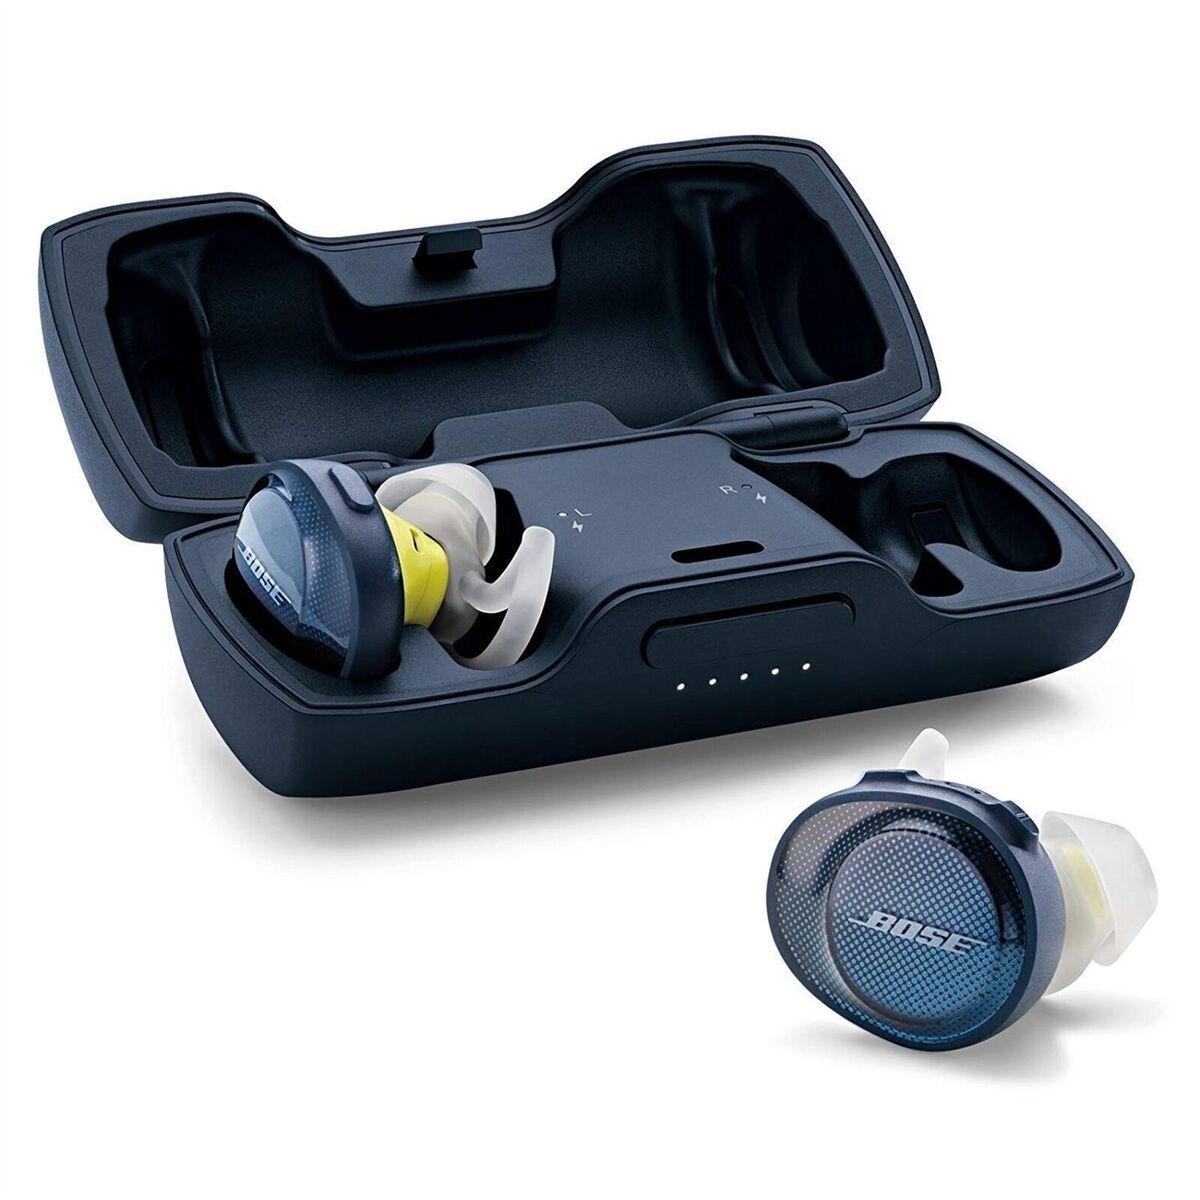 Understanding The Battery Life Of Bose Wireless Earbuds